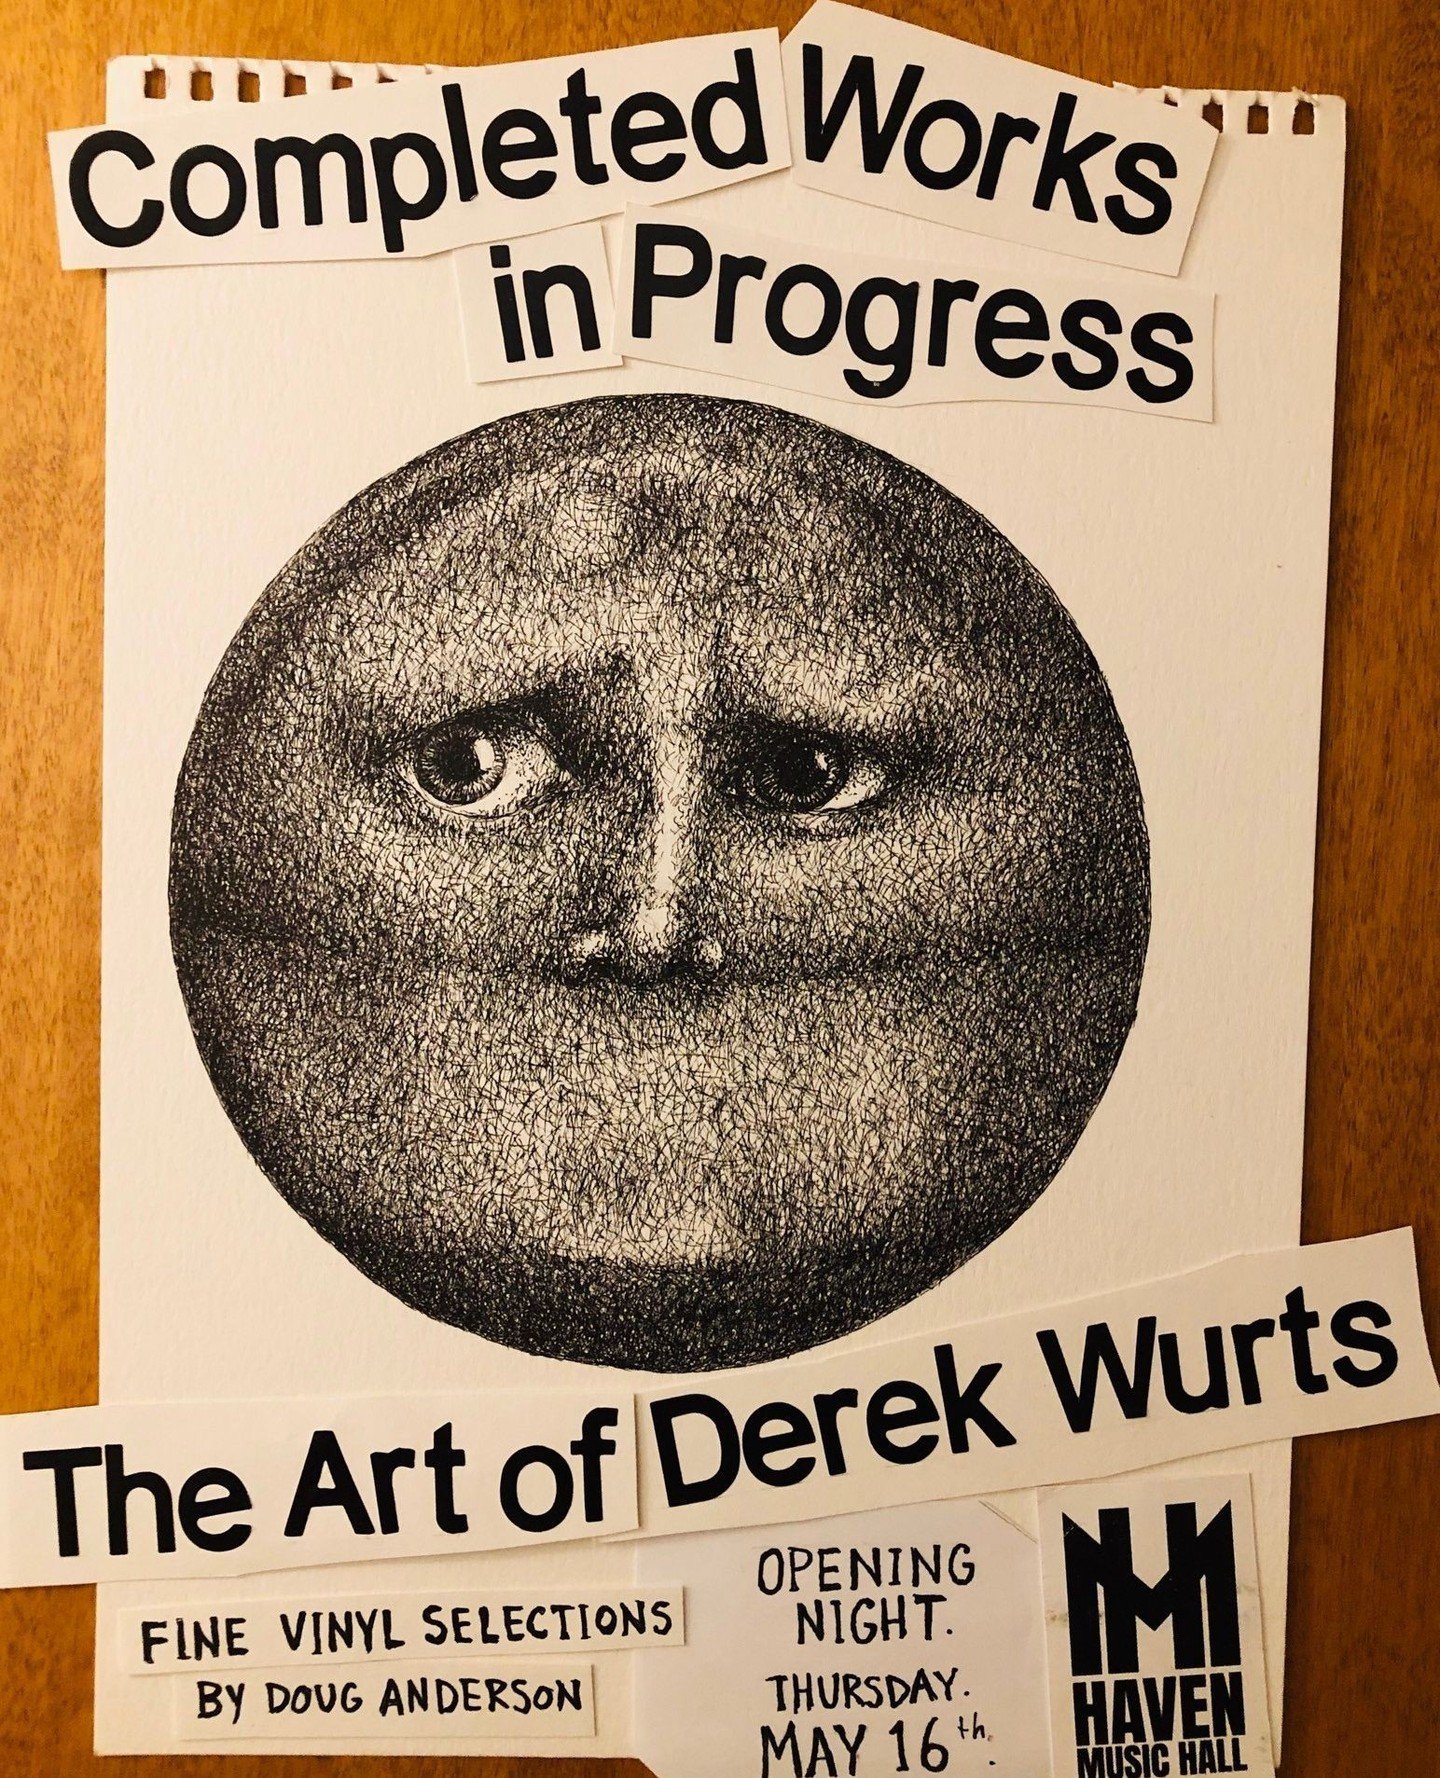 TONIGHT!! Join us to celebrate the opening of Derek Wurts' presentation of his collection &quot;Completed Works In Progress&quot; on May 16th from 6pm-10pm! Featuring the illustrations and musings of local artist Derek Wurts, and DJ Doug Anderson spi